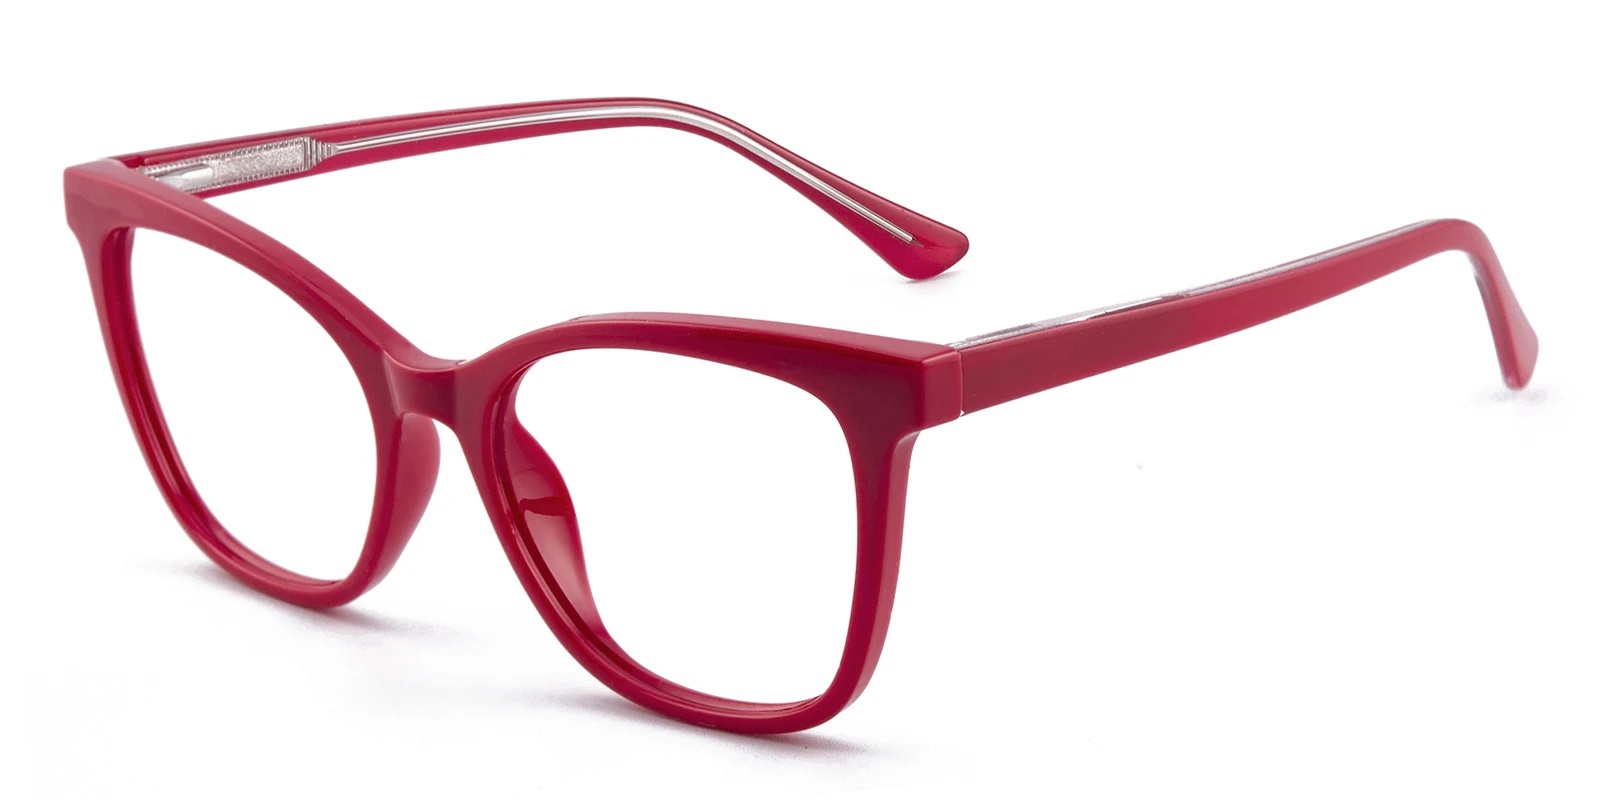 Exciting Eyeglasses Online Discount Offers